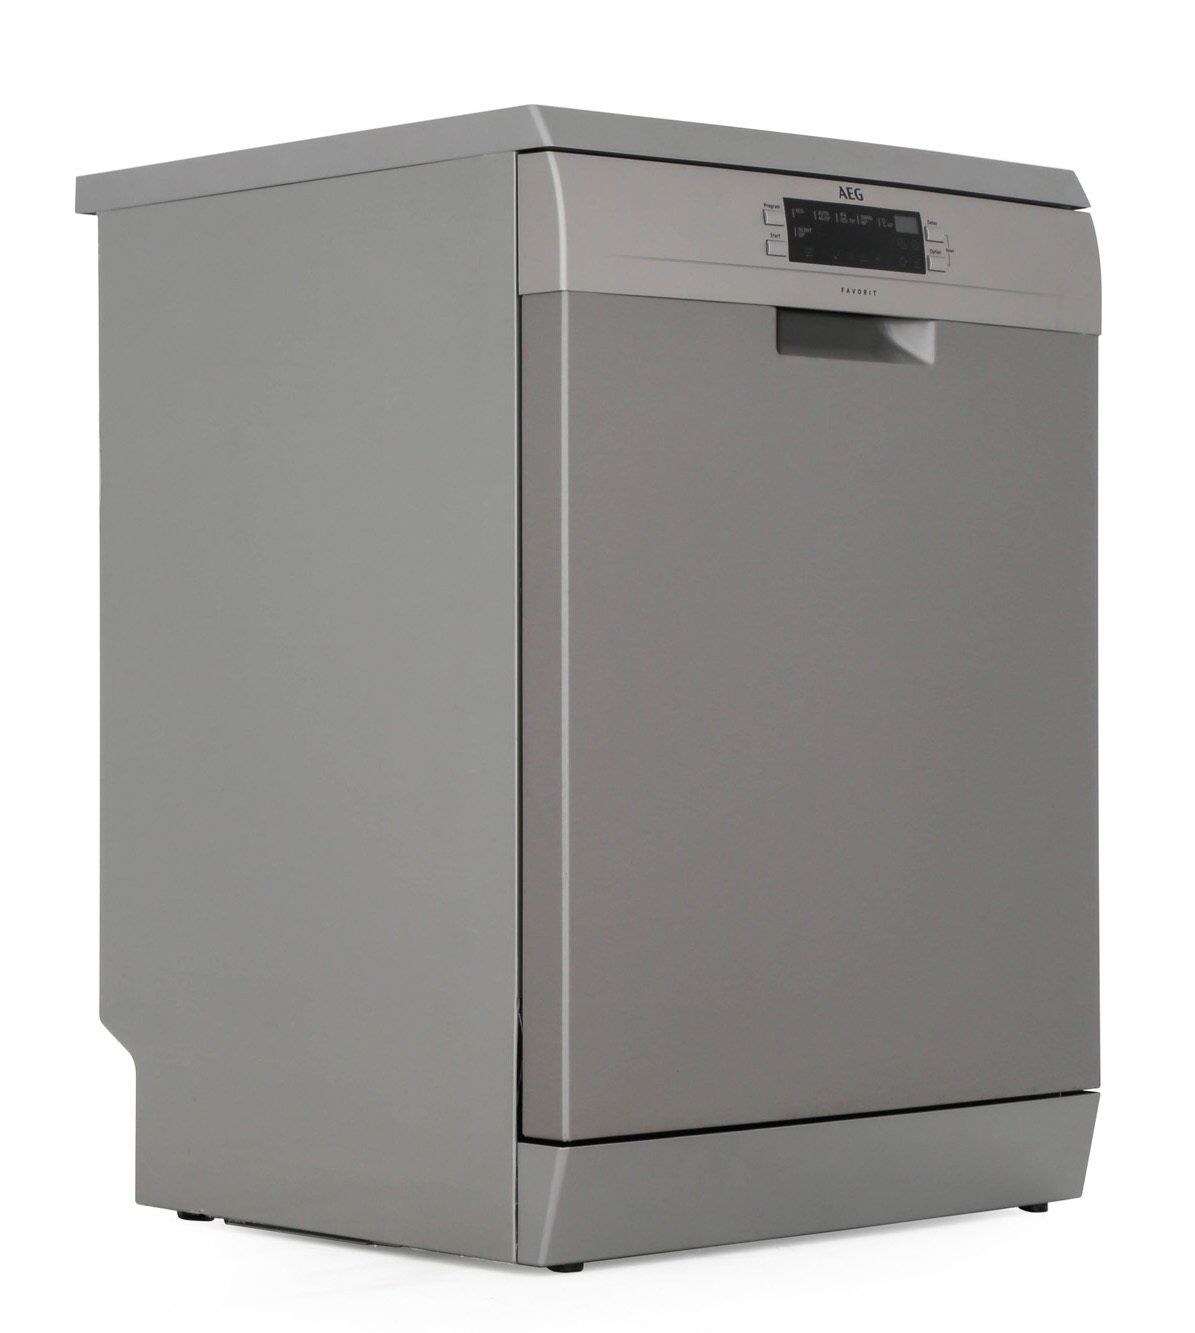 AEG FFE62620PM Dishwasher with AirDry Technology - Stainless Steel